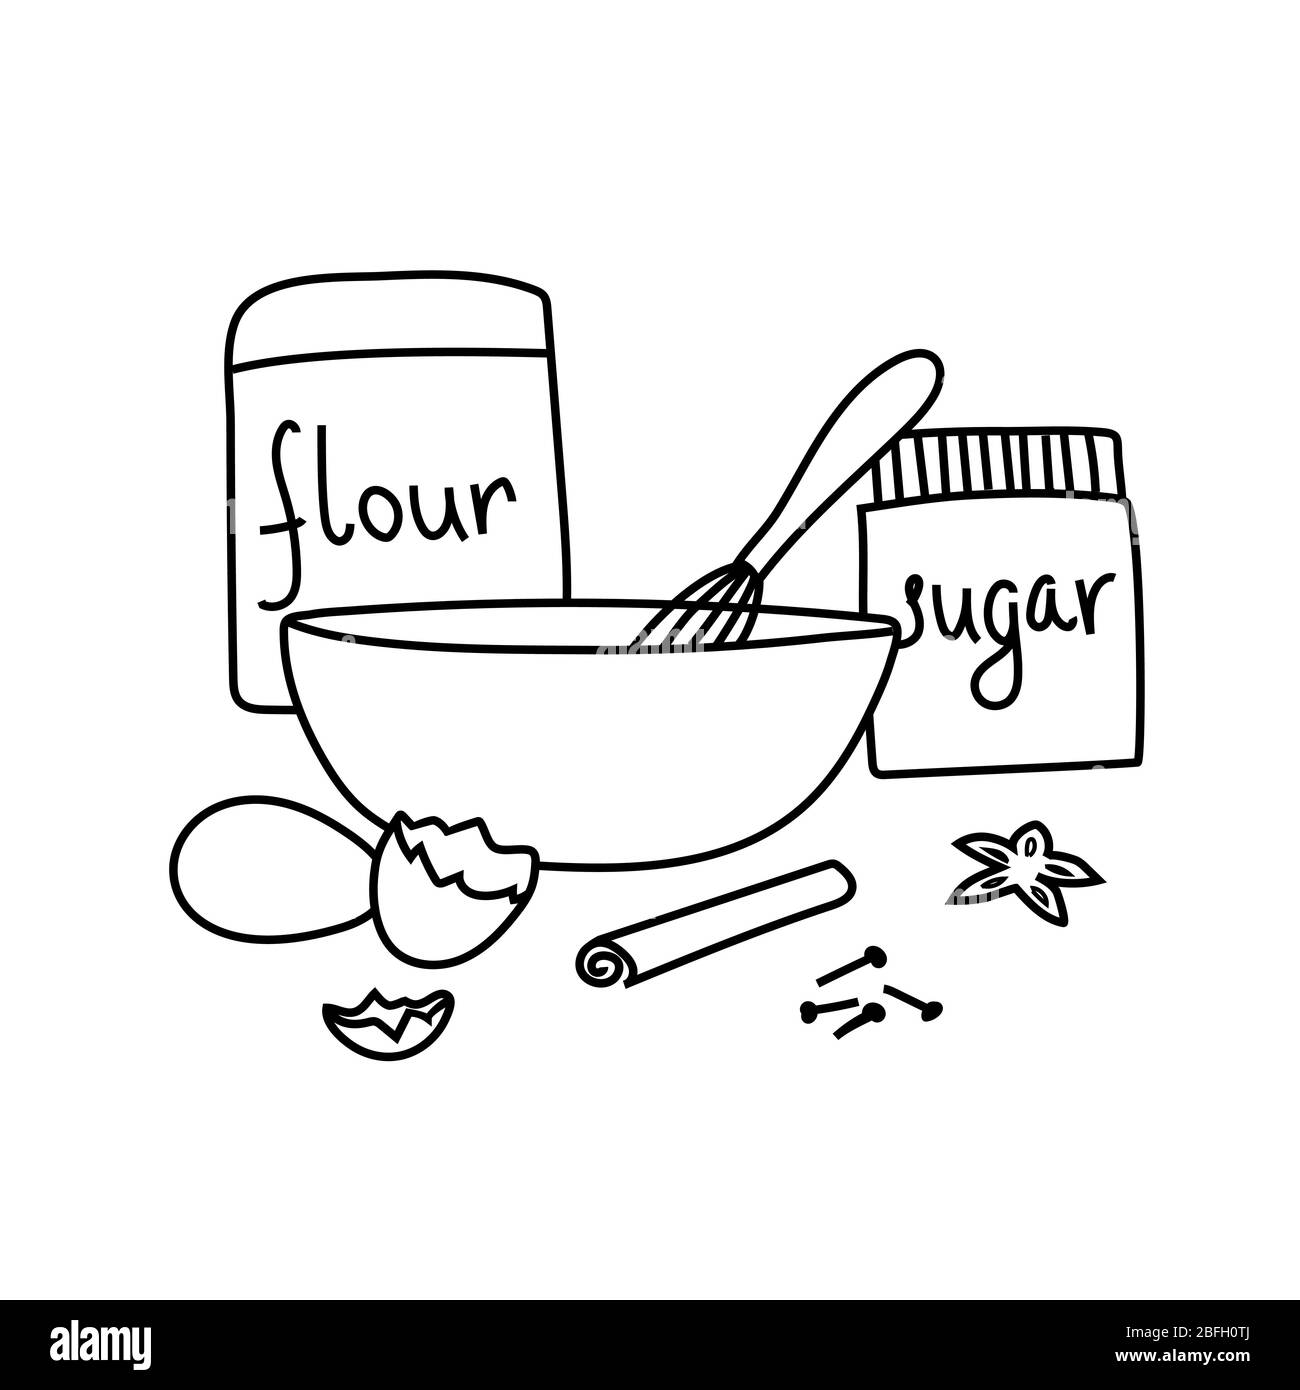 Dough preparation mixing ingredients in bowl Vector Image